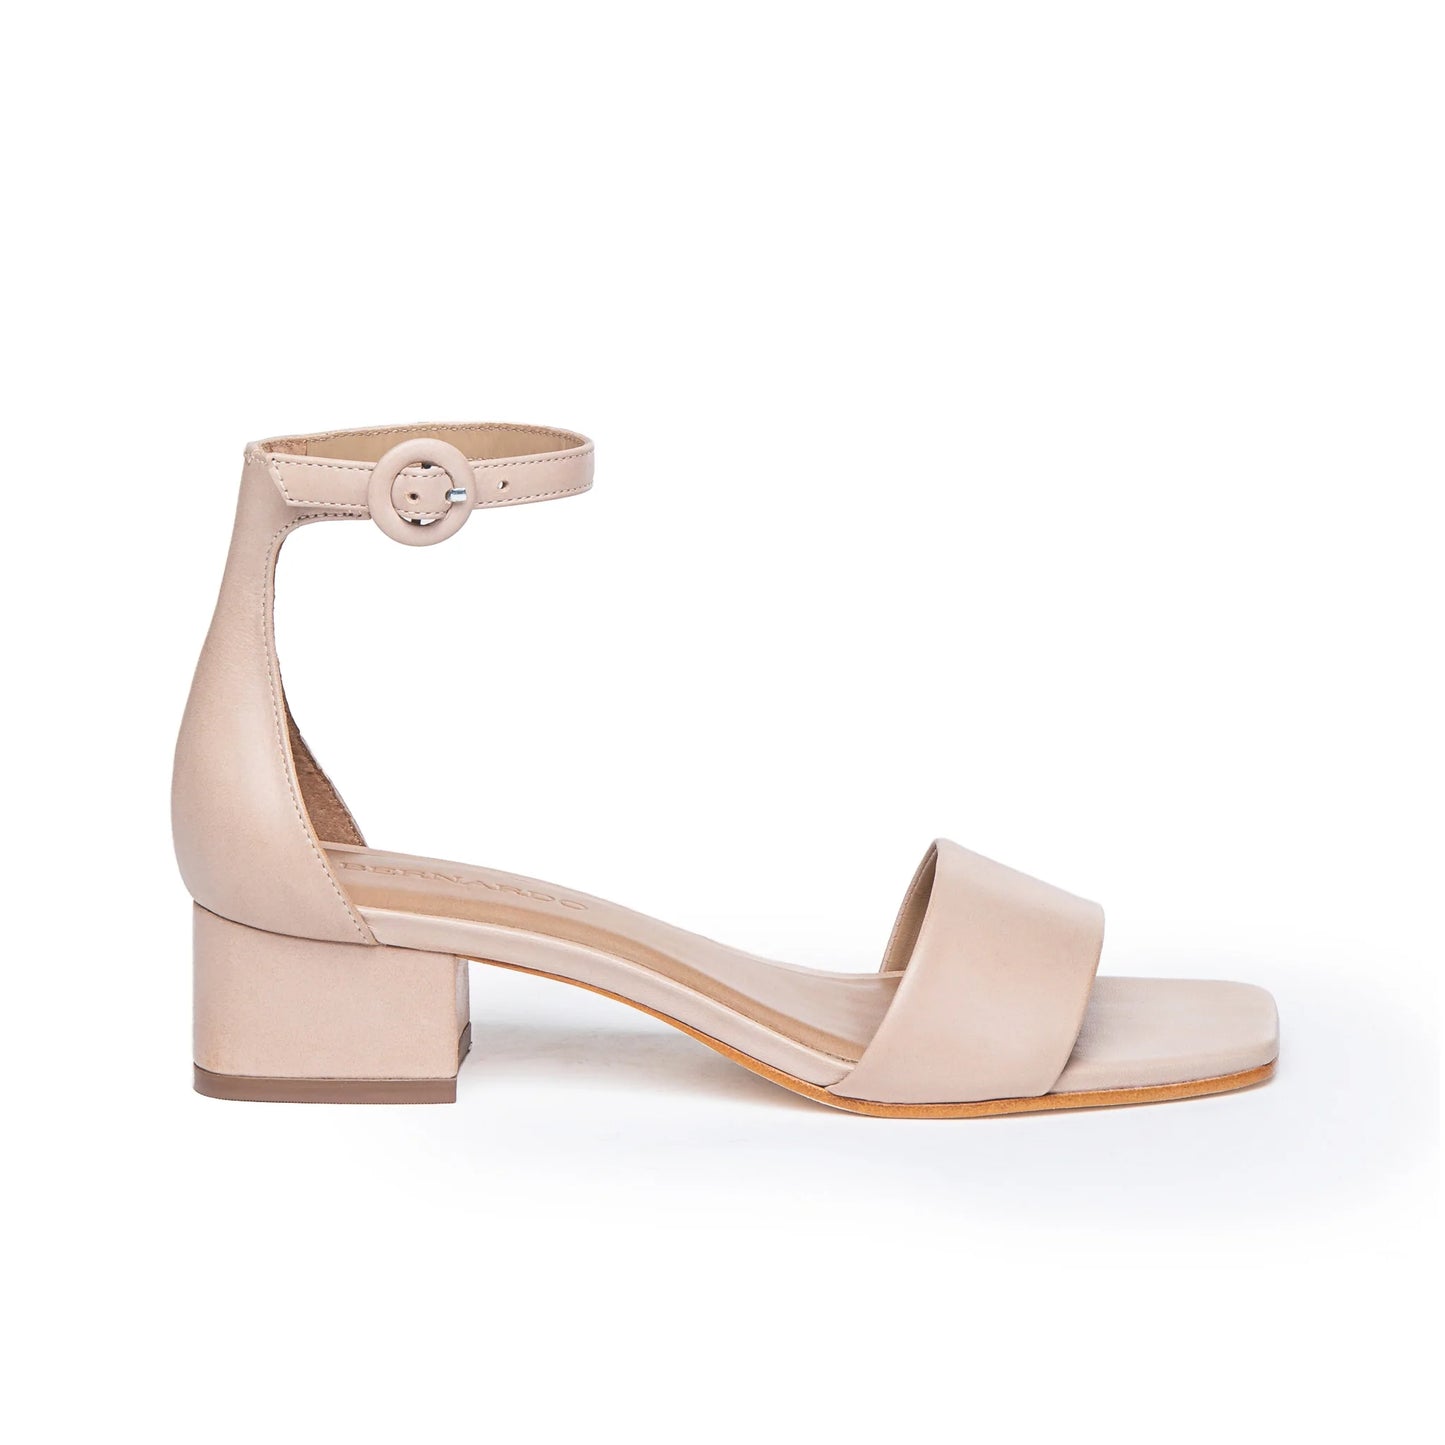 Load image into Gallery viewer, Jalena Sandal - Muse Shoe Studio
